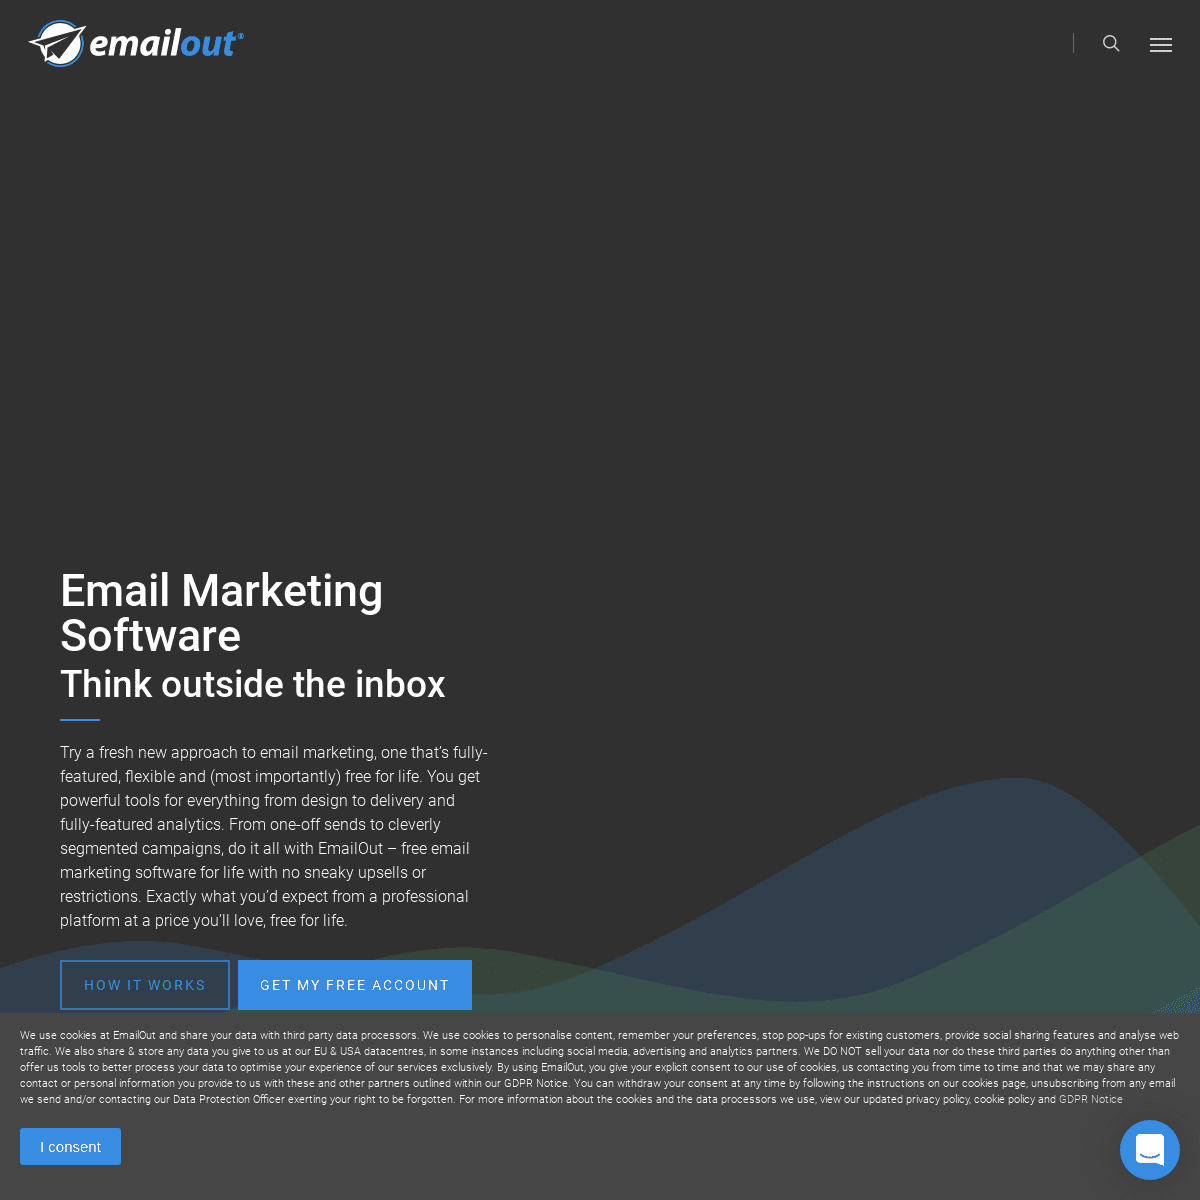 A complete backup of emailout.com